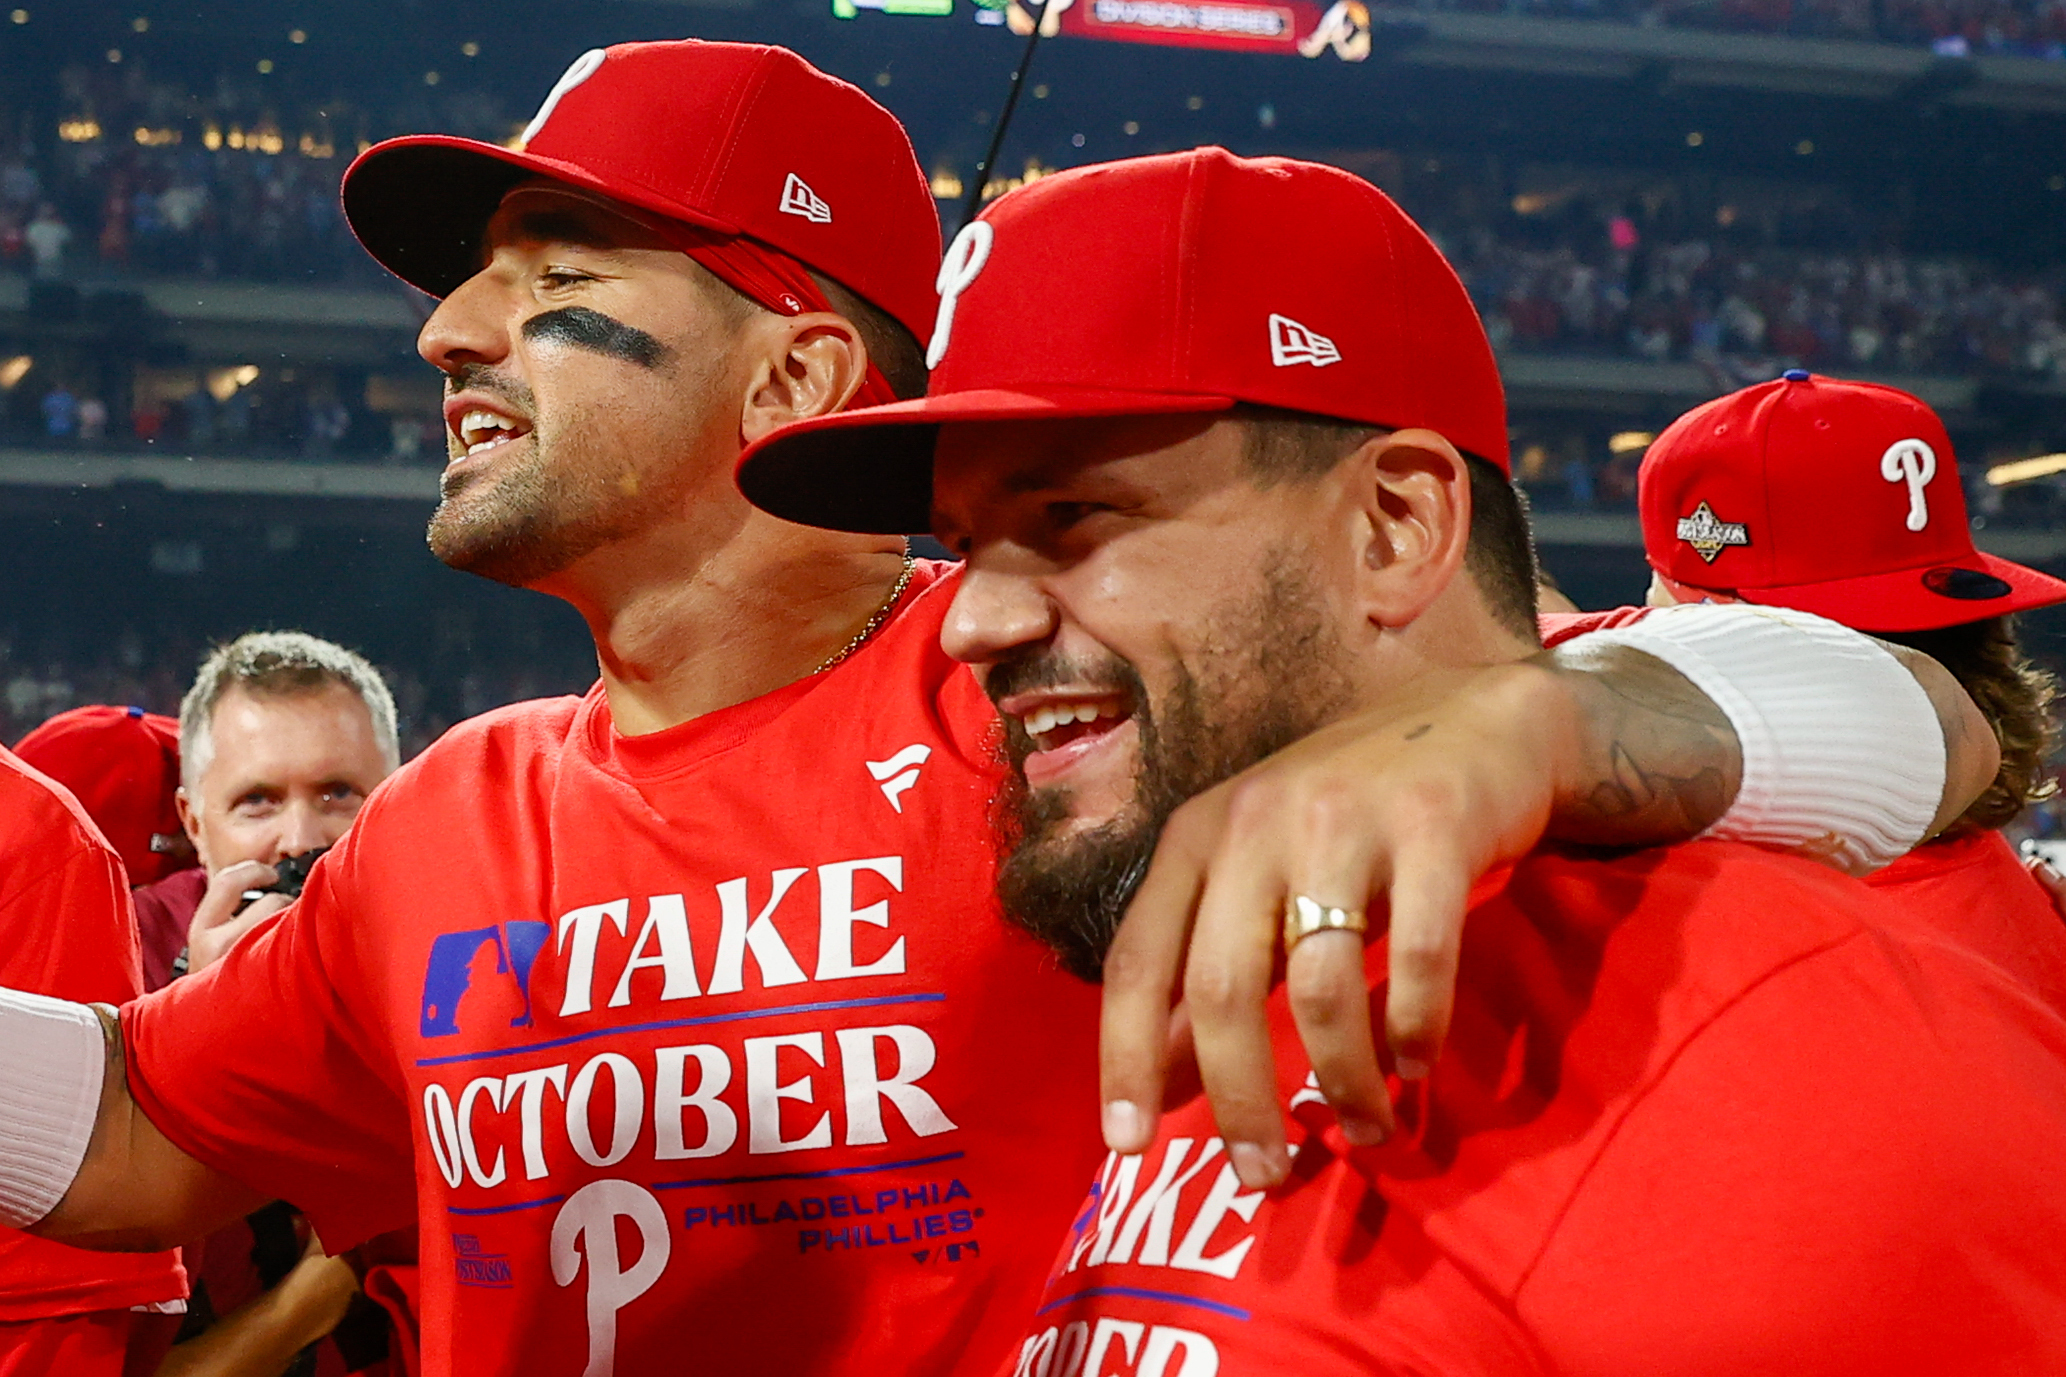 MLB Postseason 2022: Phillies fans excited for playoff baseball at